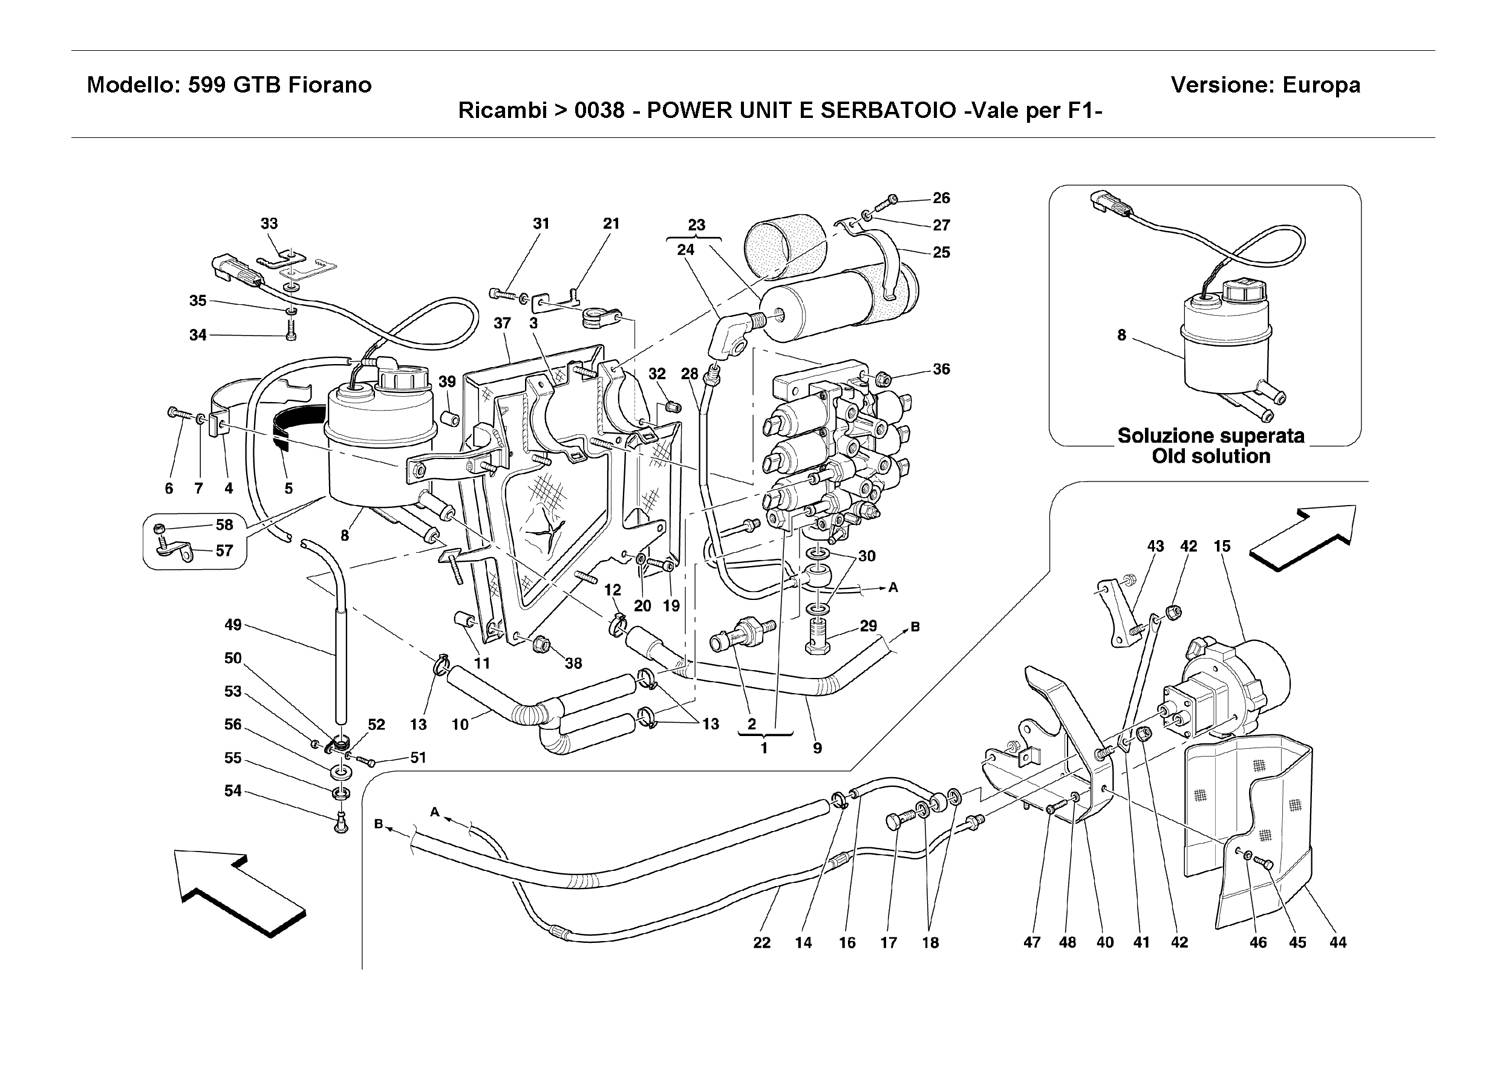 POWER UNIT AND TANK -Valid for F1 -